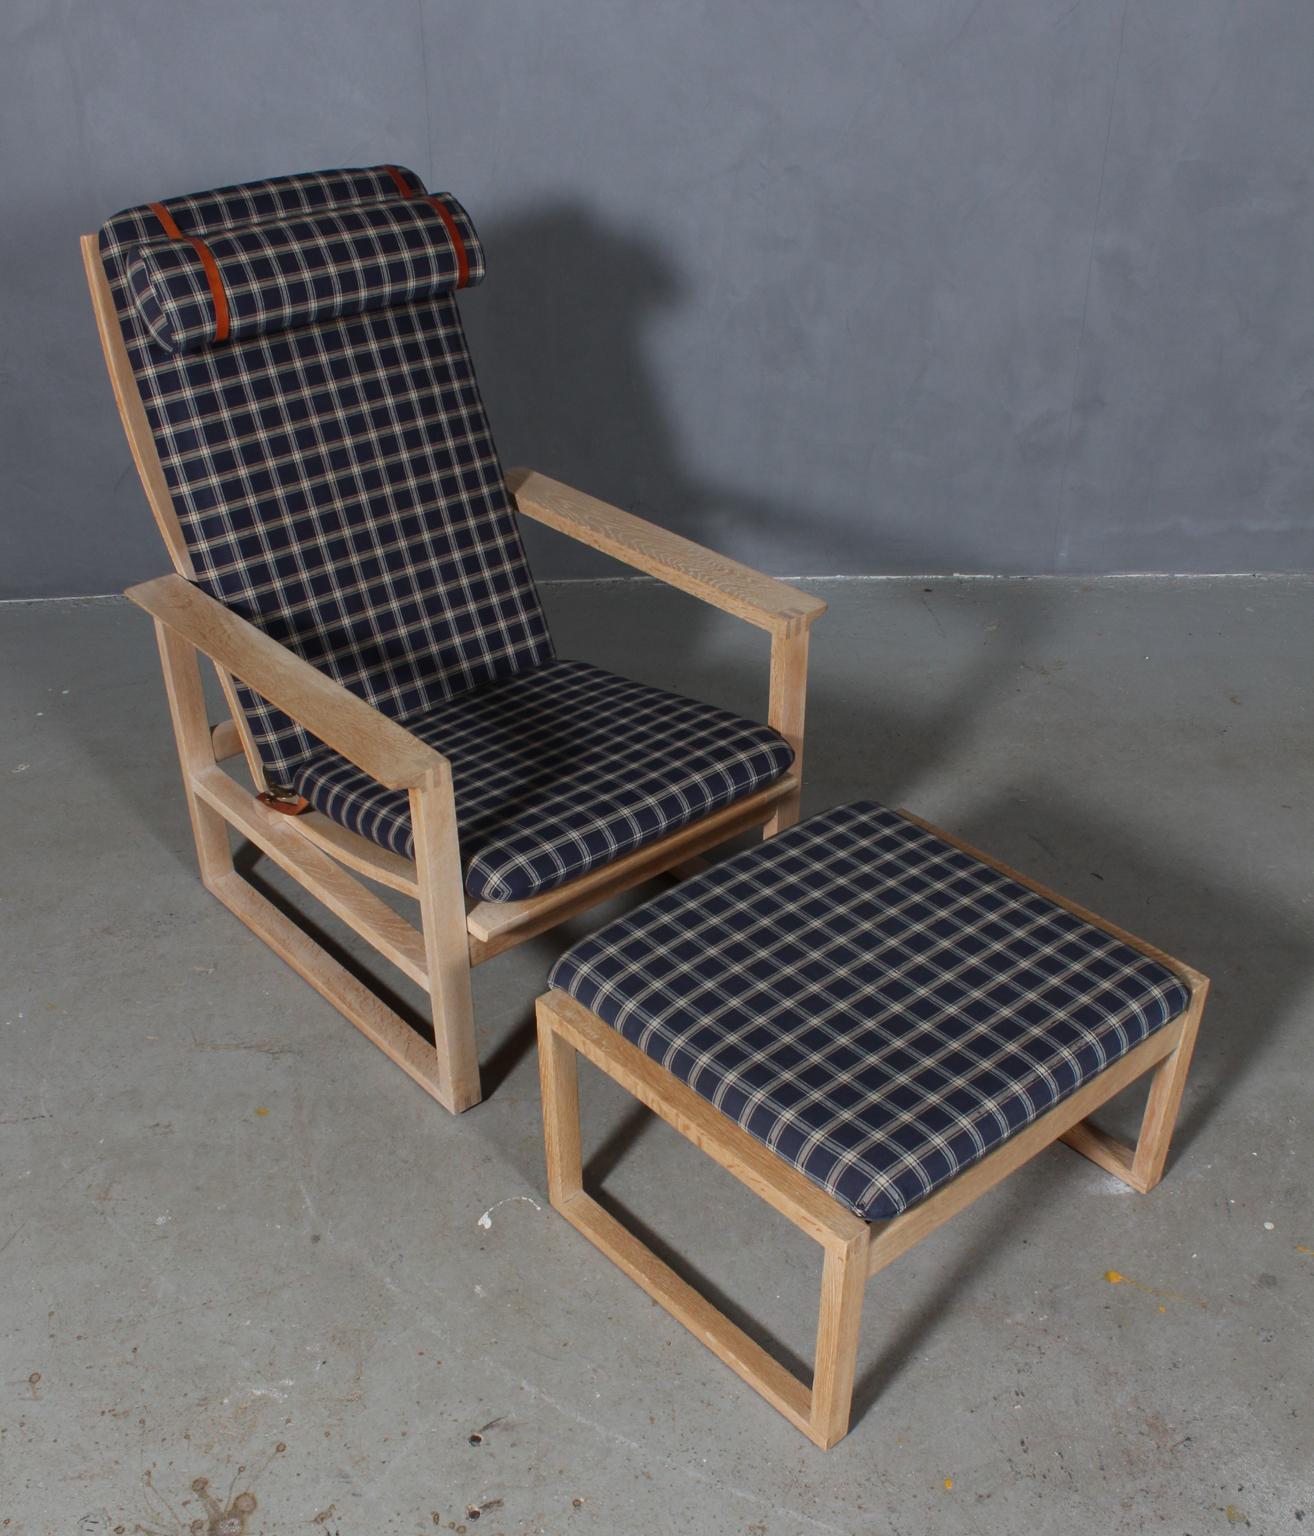 A Børge Mogensen lounge chair and ottoman designed in 1956 model number 2256 for Fredericia Stolefabrik. Cubical frames made of solid oak with finger joints. This high back model 2254 also reclines.

Original upholstered in Cotil fabric. The seat